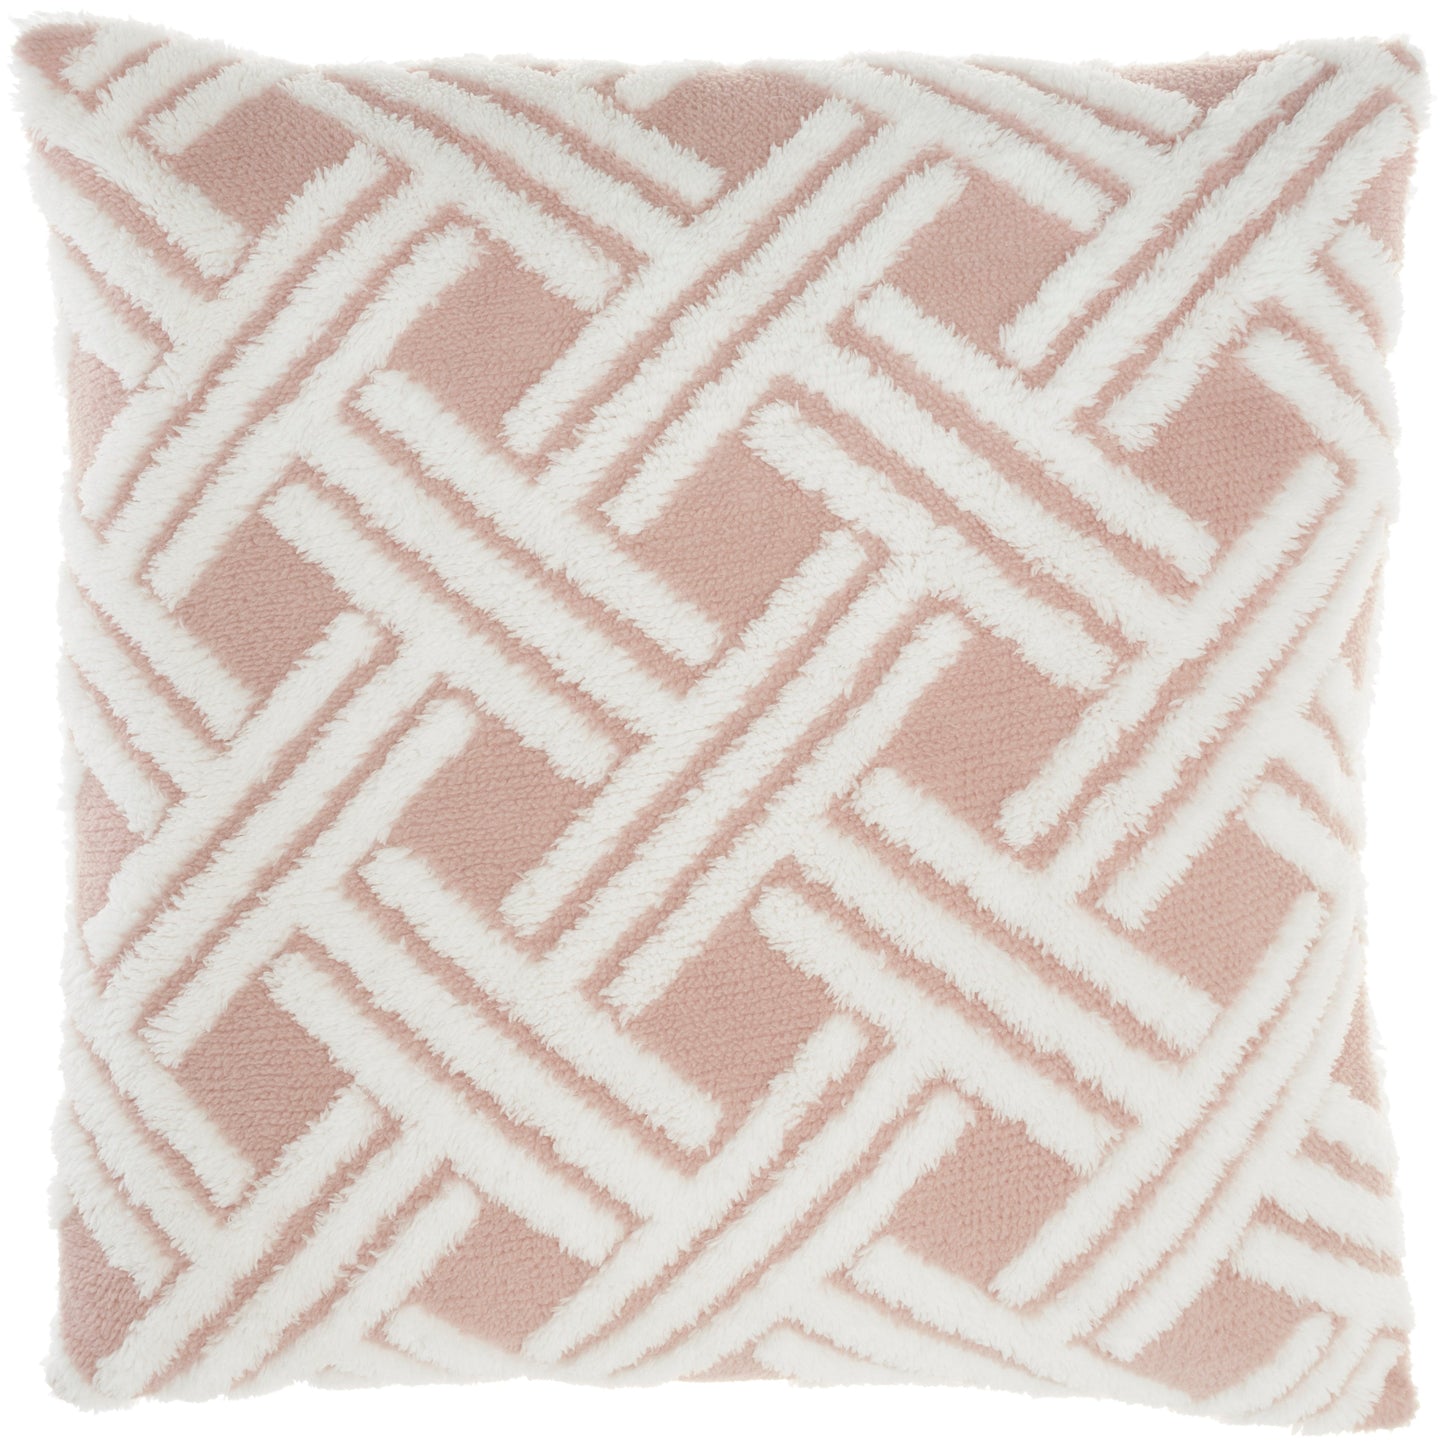 Faux Fur TL901 Synthetic Blend Jaquared Basketweave Throw Pillow From Mina Victory By Nourison Rugs